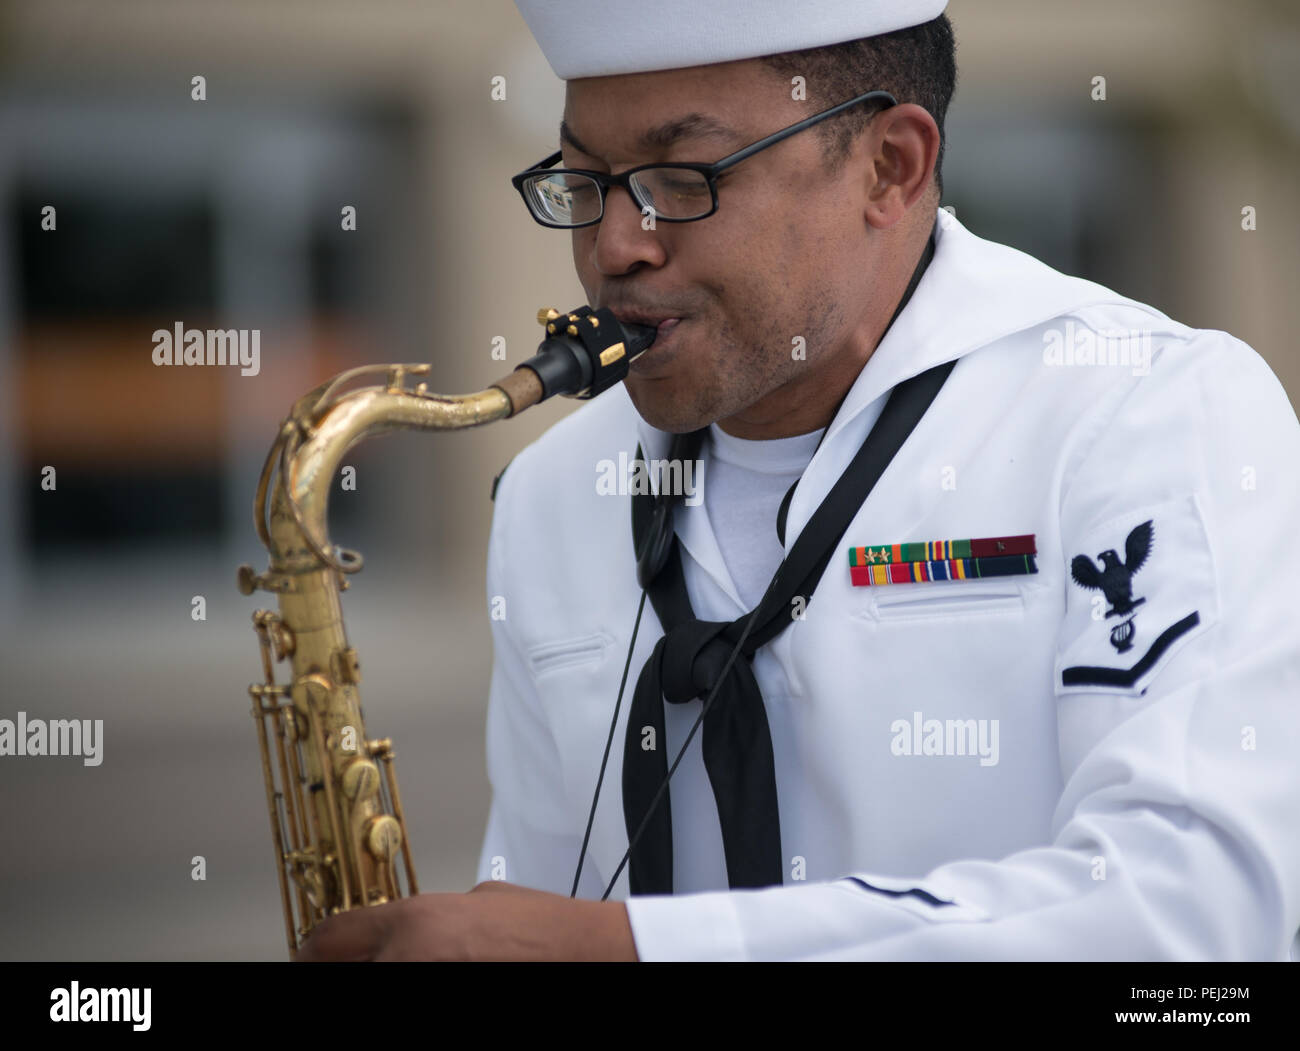 150826-N-CI175-085 DETROIT, Mich. (Aug. 26, 2015) Musician 3rd Class Jason Gay, assigned to the Navy Band Great Lakes Brass Band, plays in a concert along Detroit’s downtown RiverWalk as part of Detroit Navy Week. Navy Weeks focus a variety of assets, equipment and personnel on a single city for a week-long series of engagements designed to bring America's Navy closer to the people it protects, in cities that don't have a large naval presence. (U.S. Navy photo by Mass Communication Specialist 1st Class Jon Rasmussen/Released) Stock Photo